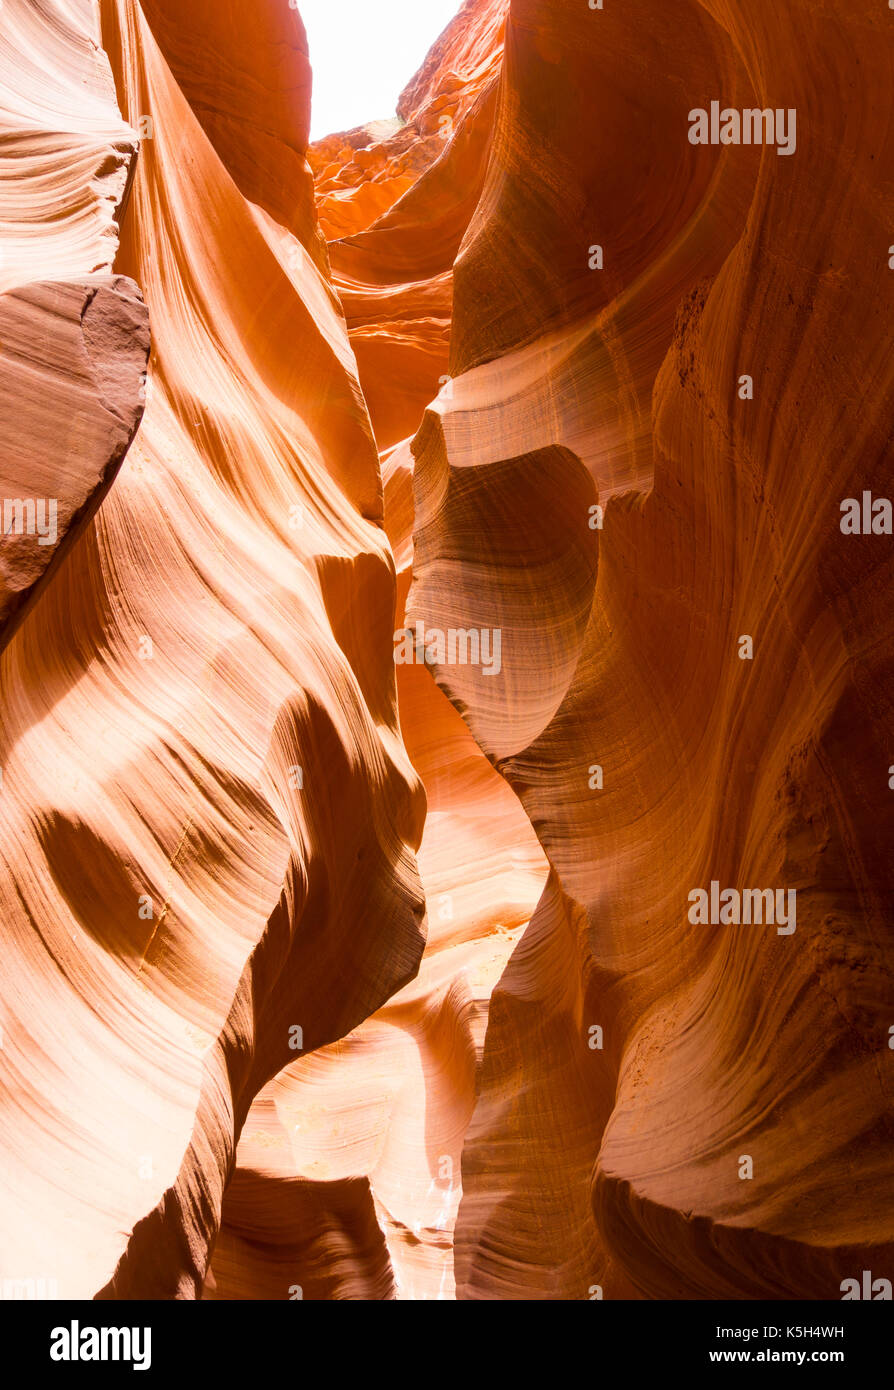 Eroded rock formations inside the Lower Antelope Canyon near Page, Arizona (USA). The sandstone slot canyon is a major tourist attraction. Stock Photo